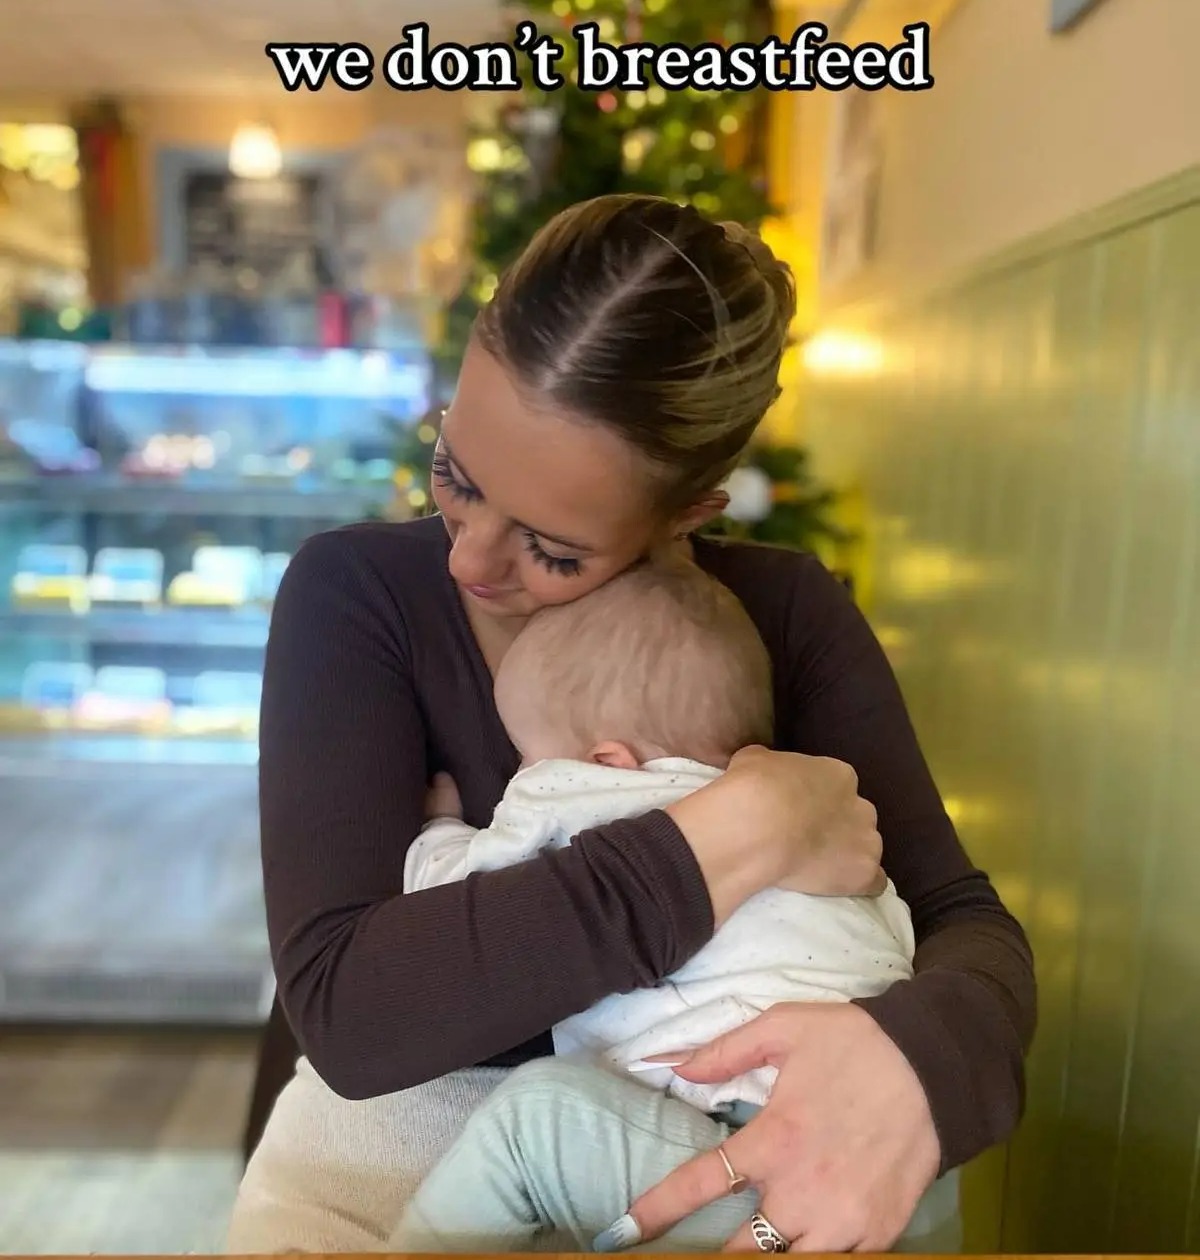 22-year-old mum-of-one Abby Williams shared that not only do people assume she scrounges money, but people also are quick to believe that she doesn't breastfeed her son